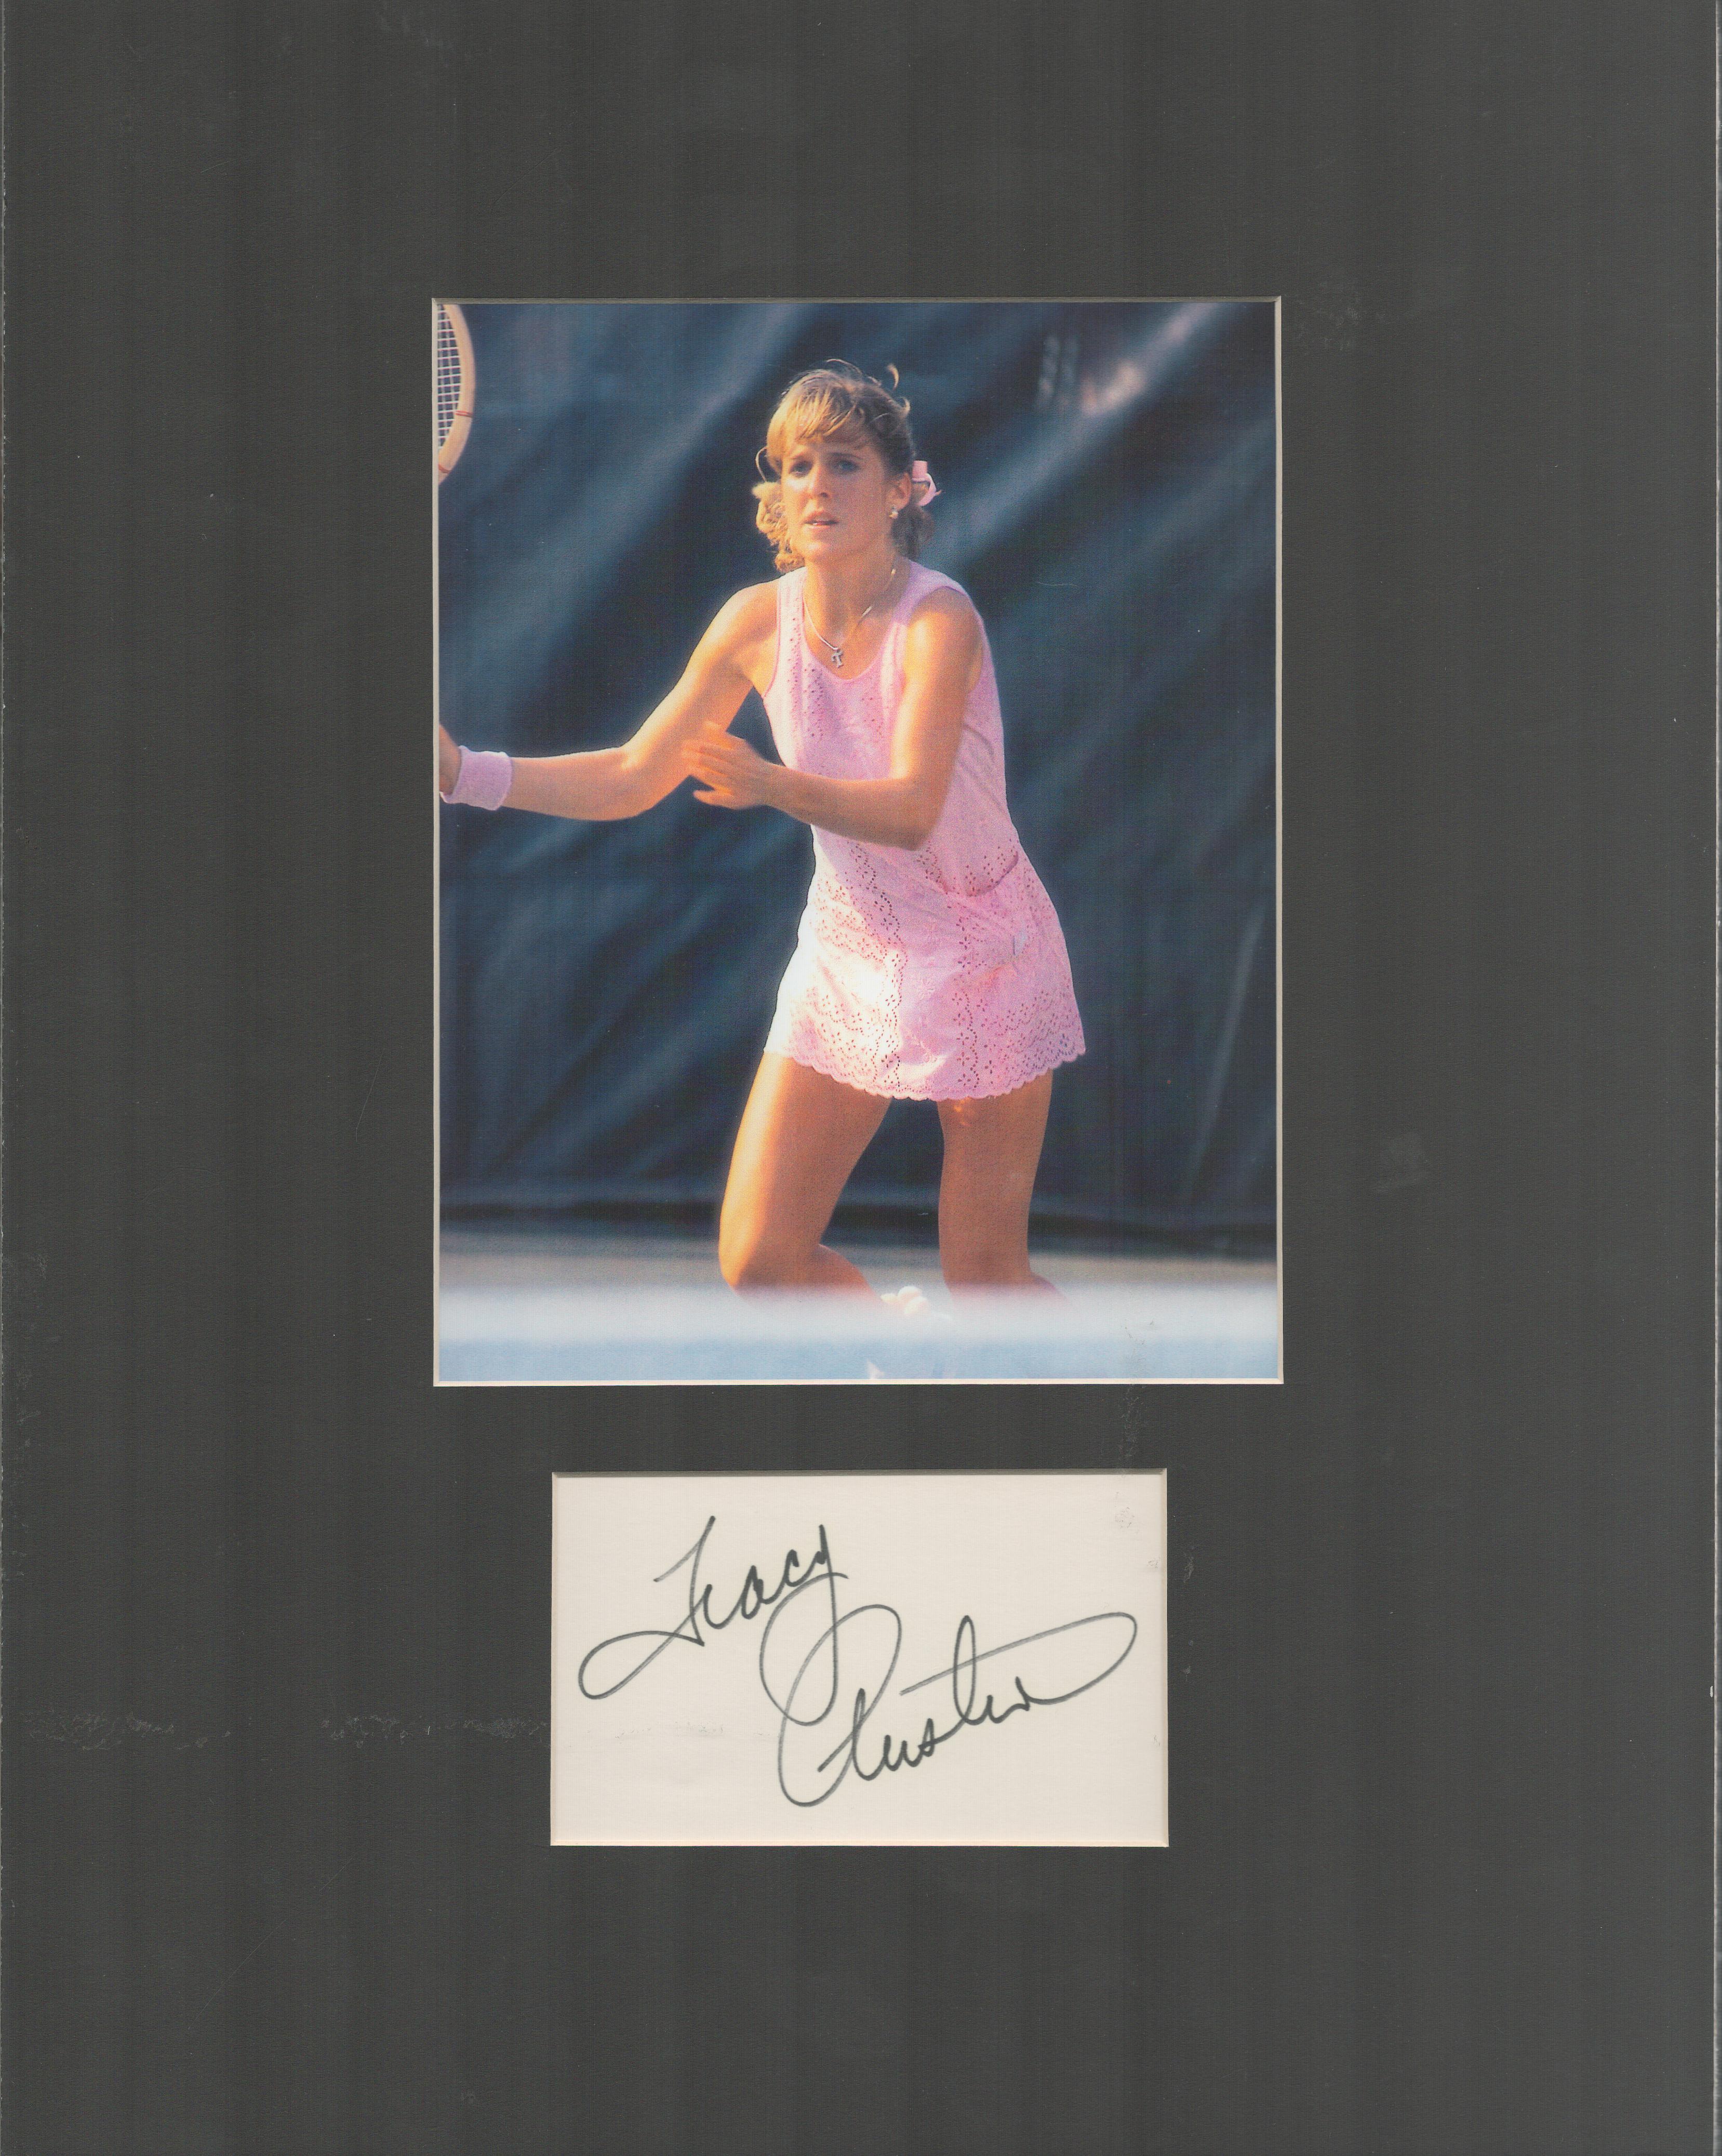 Tracy Austin 14x11 overall size mounted signature piece. Austin (born December 12, 1962) is an